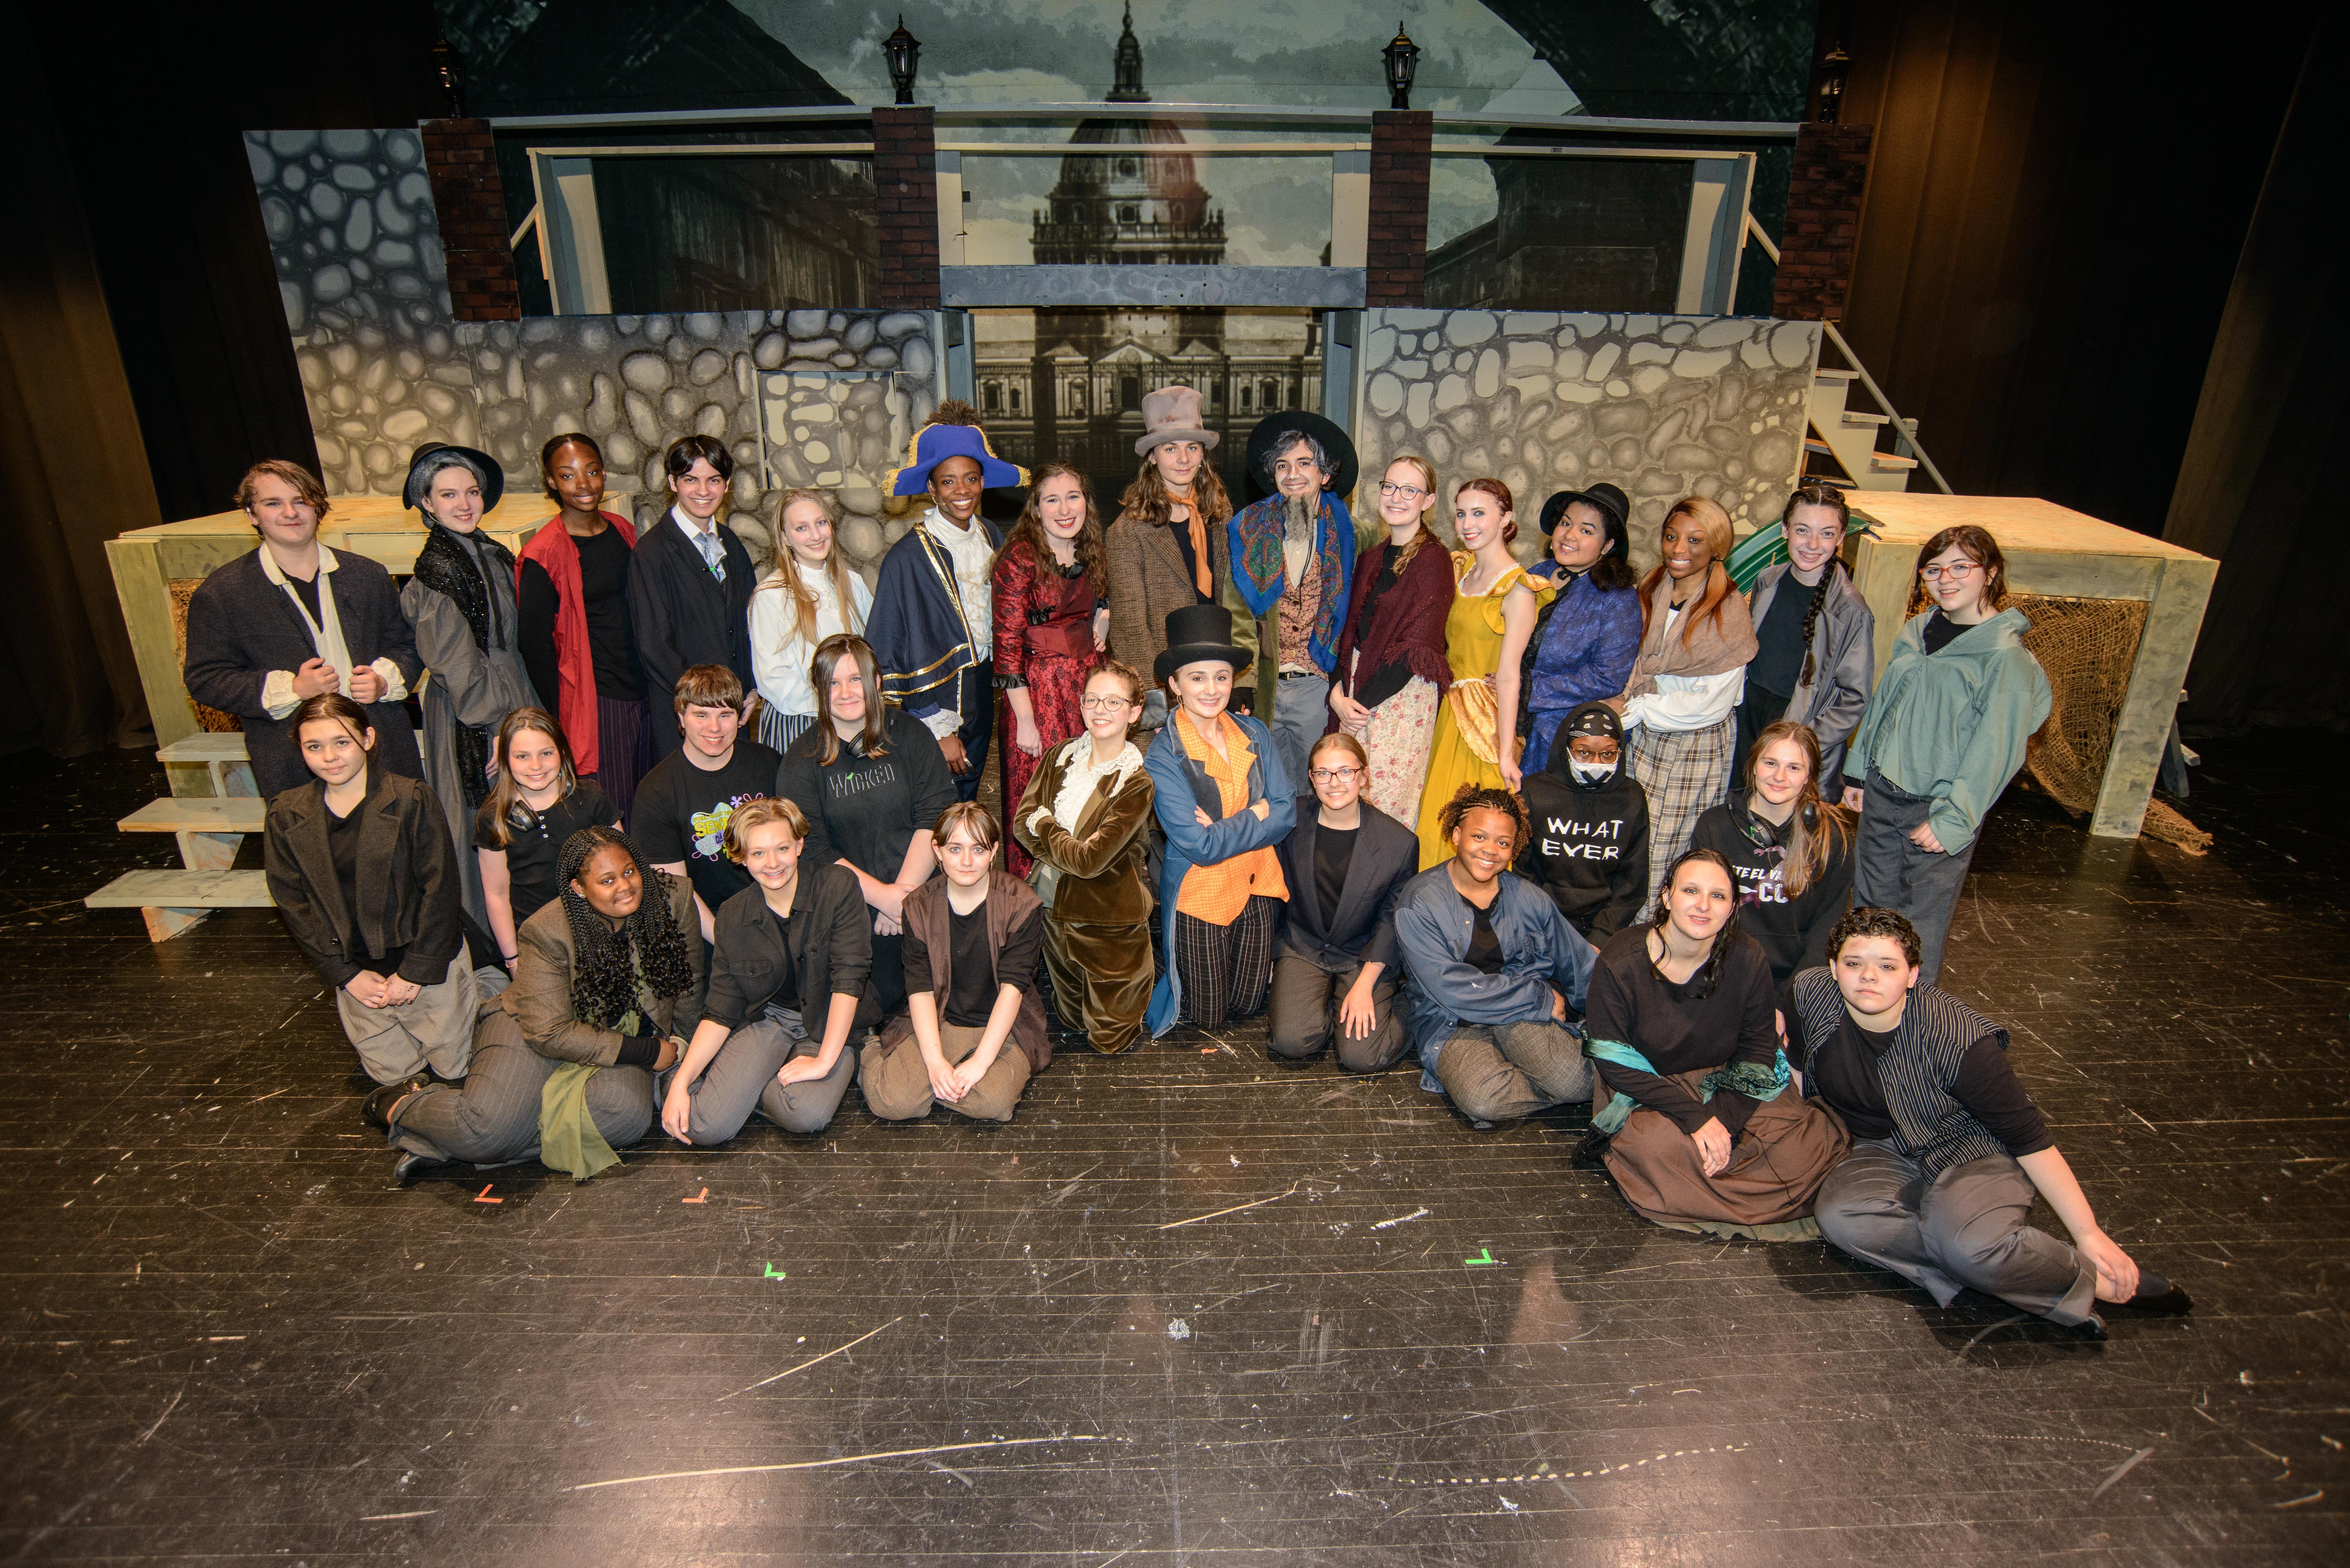 The 2022 cast and crew of Steel Valley's production of Oliver!